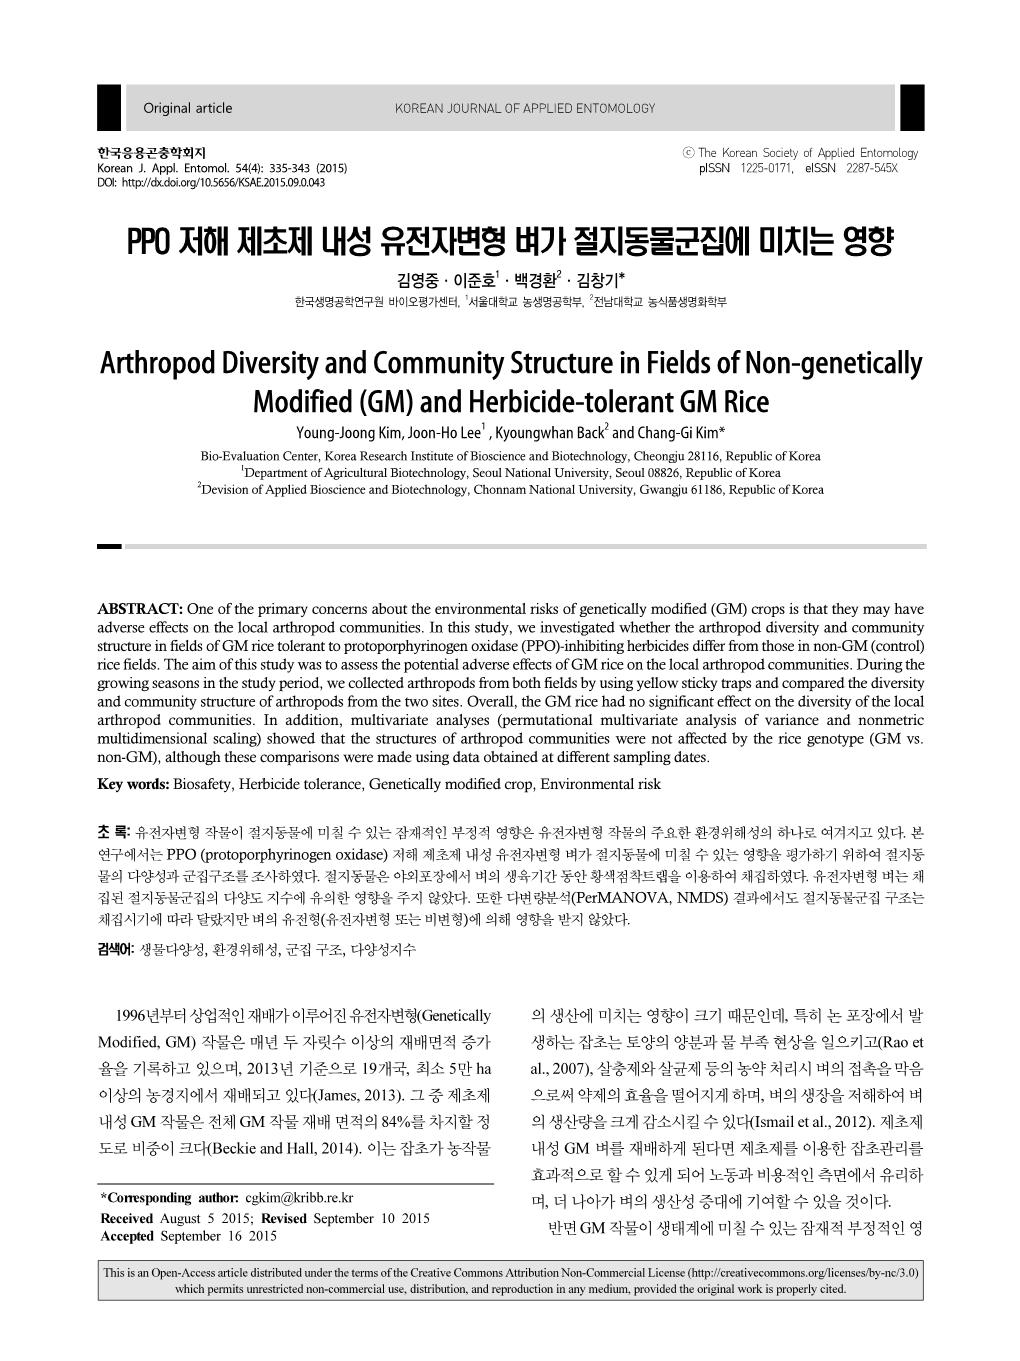 Arthropod Diversity and Community Structure in Fields